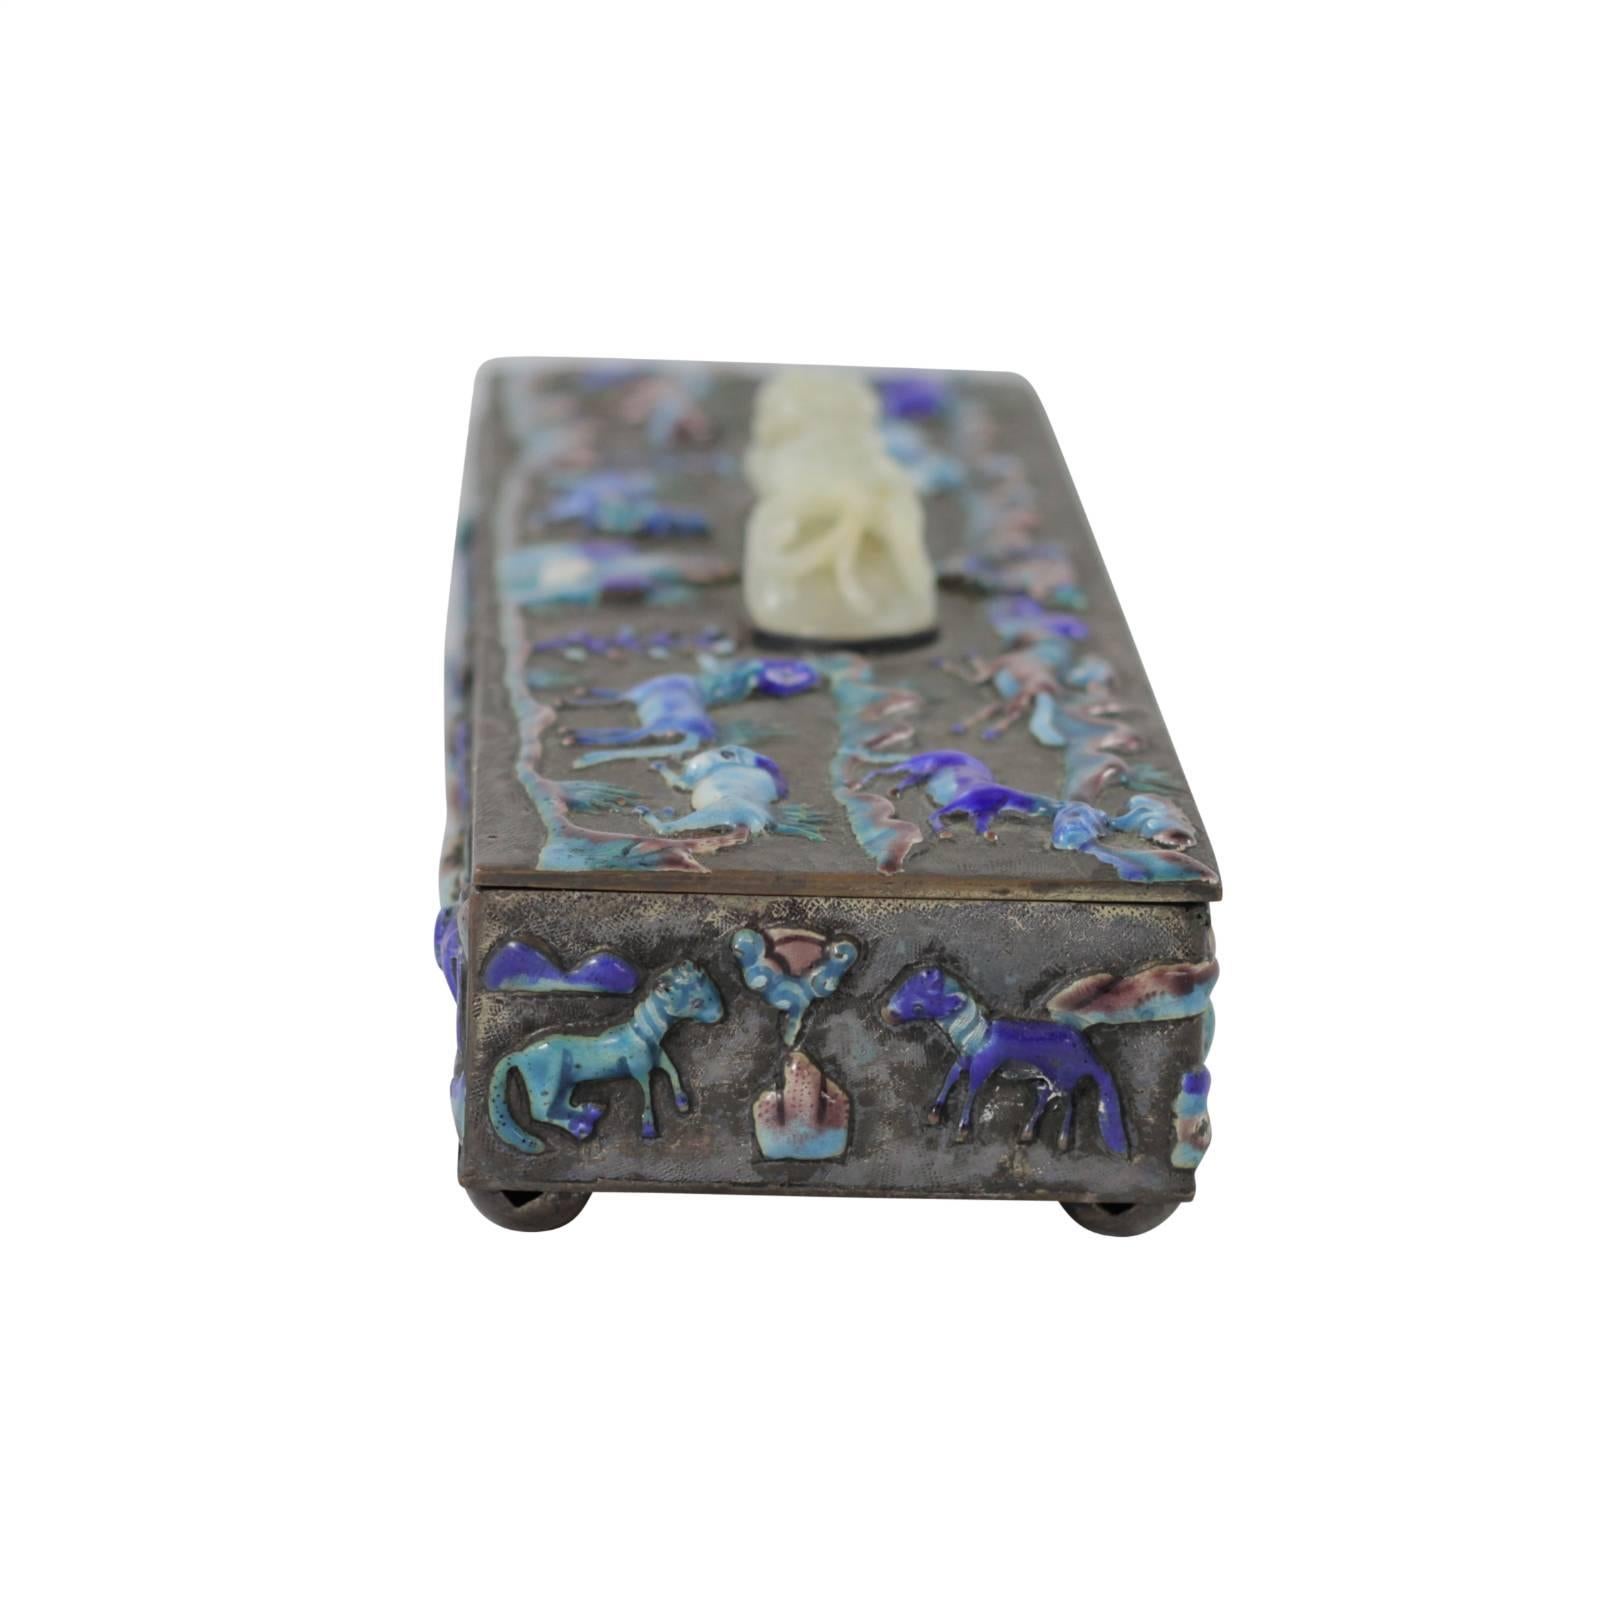 Republic Era Chinese Bronze Box with Jade and Enamel Detail For Sale 1